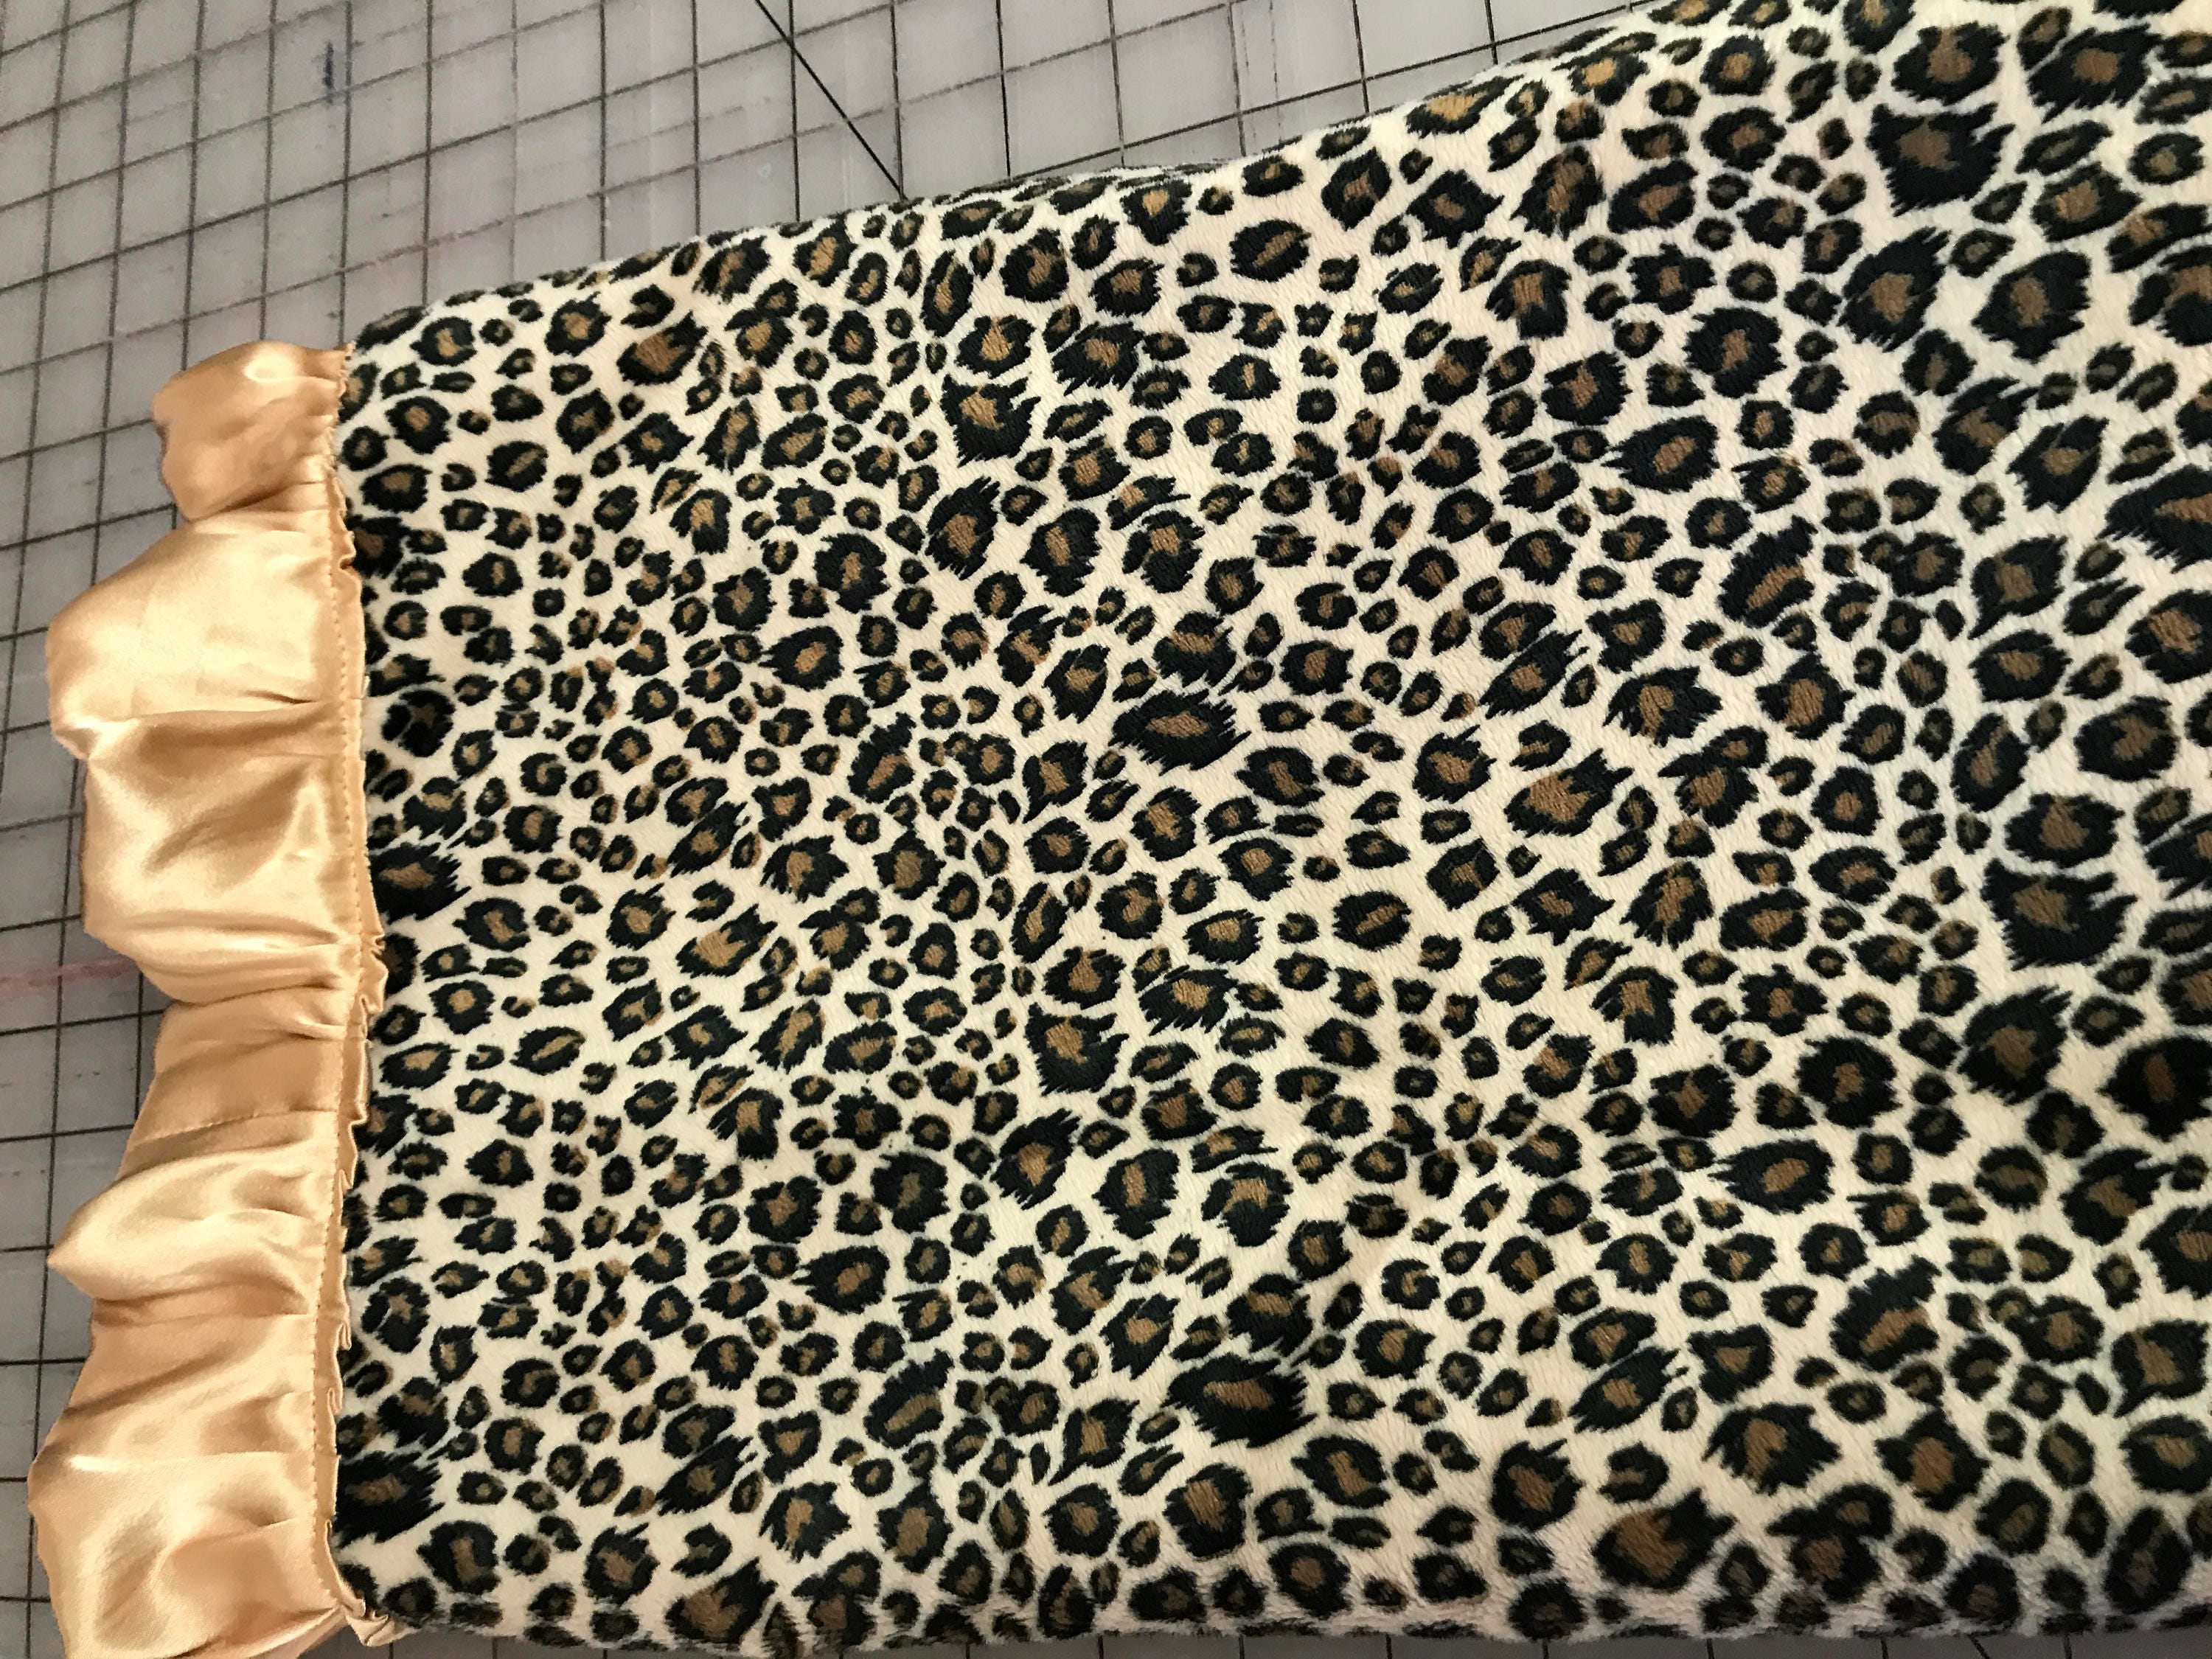 Gold and black leopard print minky and satin blanket with ruffles